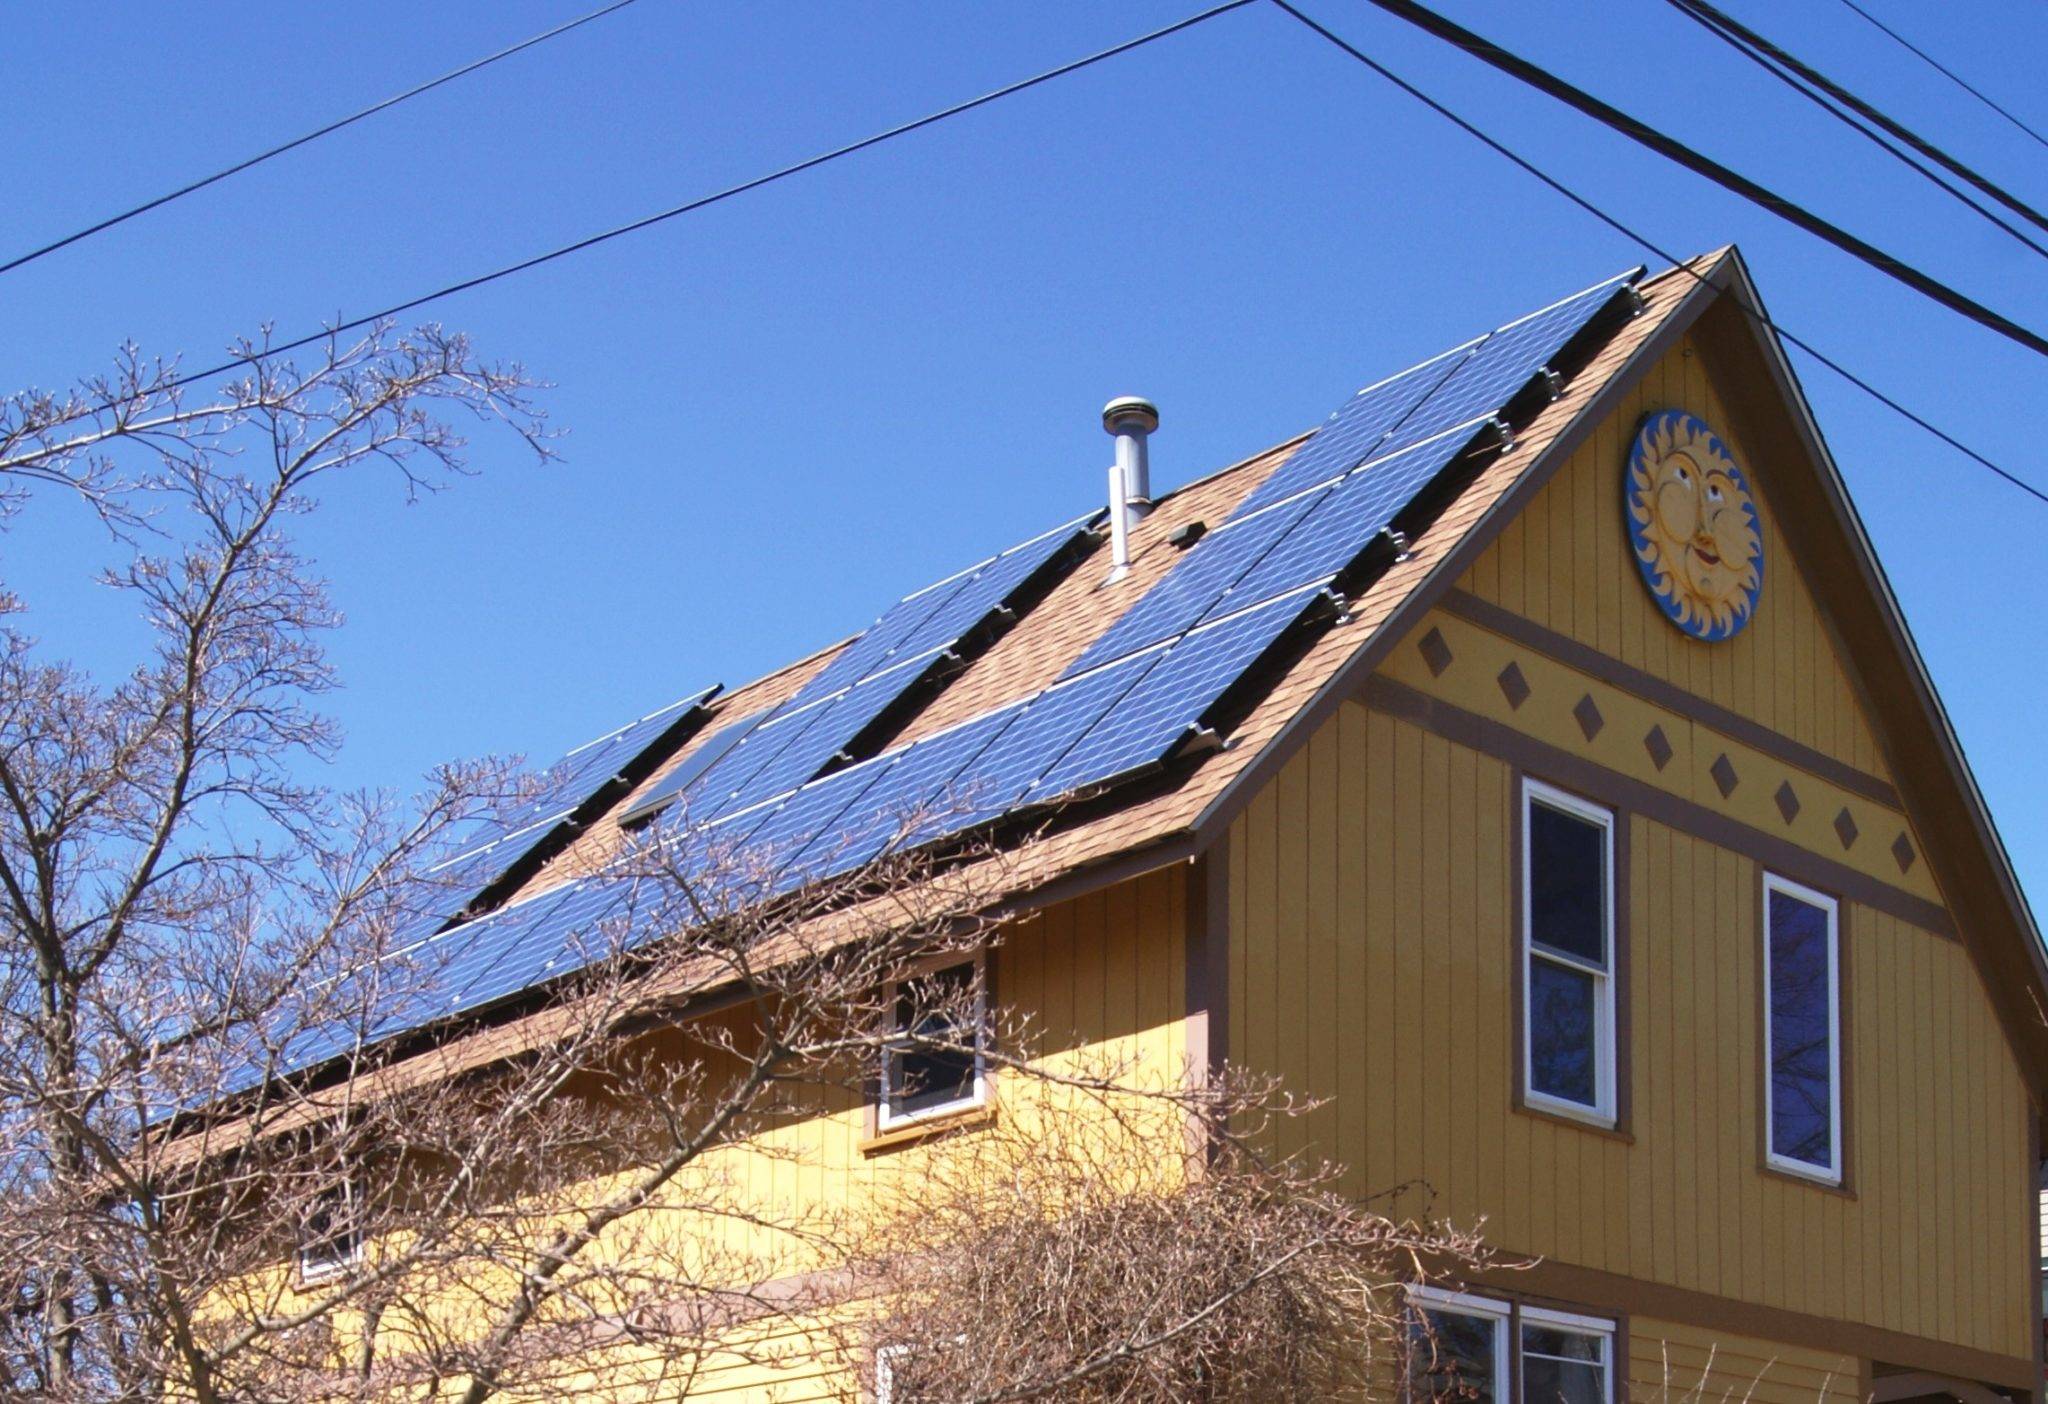 Close up of Solar Panels on a home